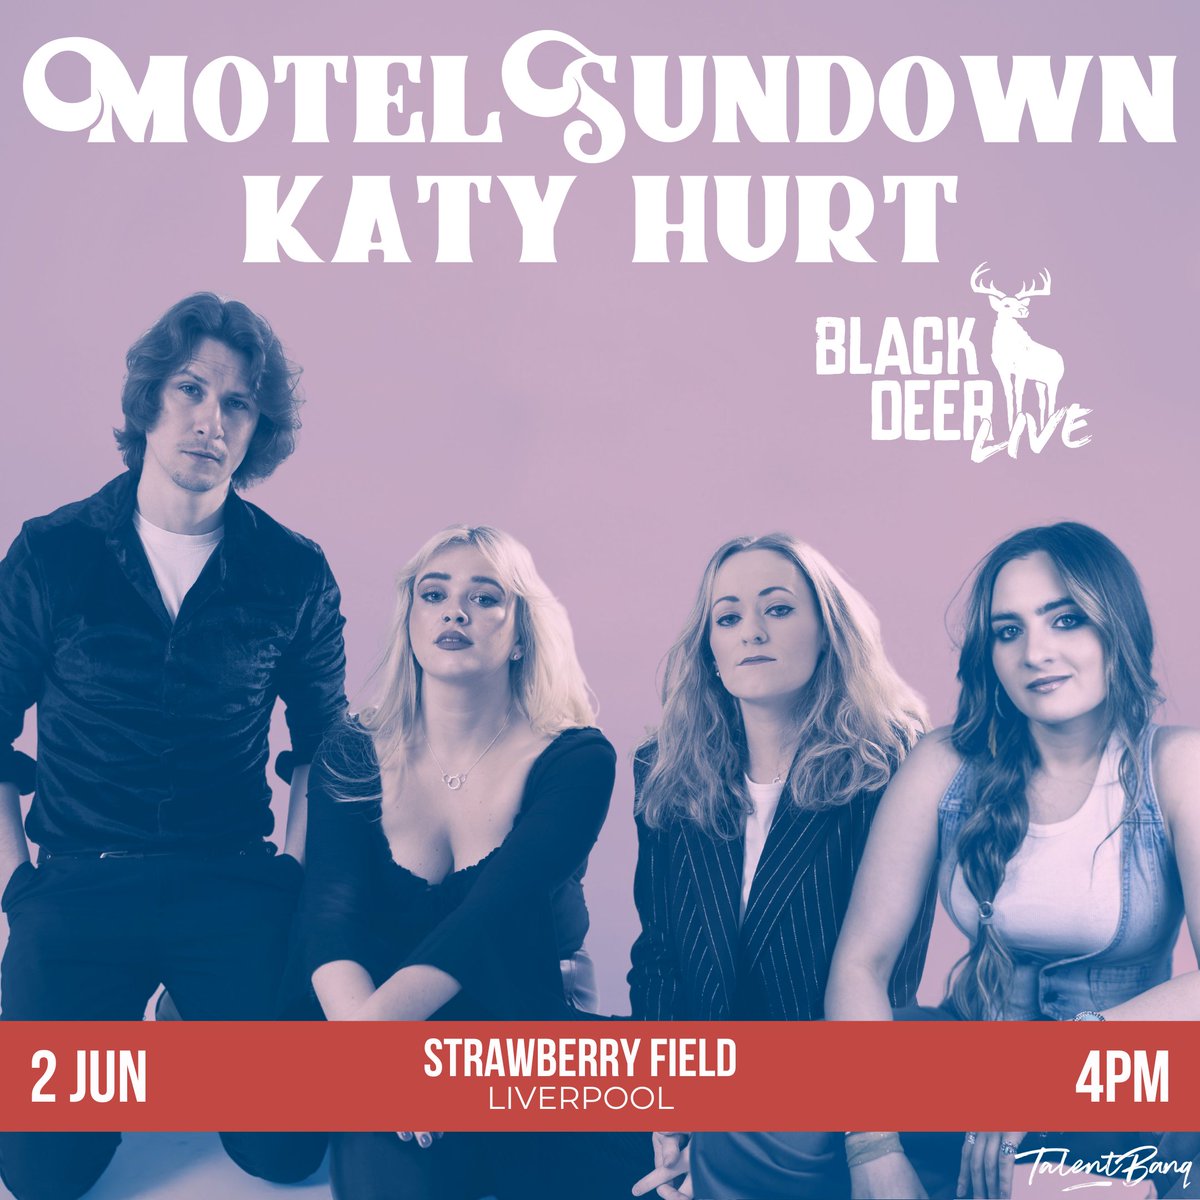 Kicking off Summer Sounds at #StrawberryField is Black Deer Live presents Motel Sundown and Katy Hurt, in collaboration with Talentbanq. 

Sunday 2nd June
Doors from 4pm
Tickets £20

Get your tickets here: blackdeerlive.talentbanq.com/events/blackde…